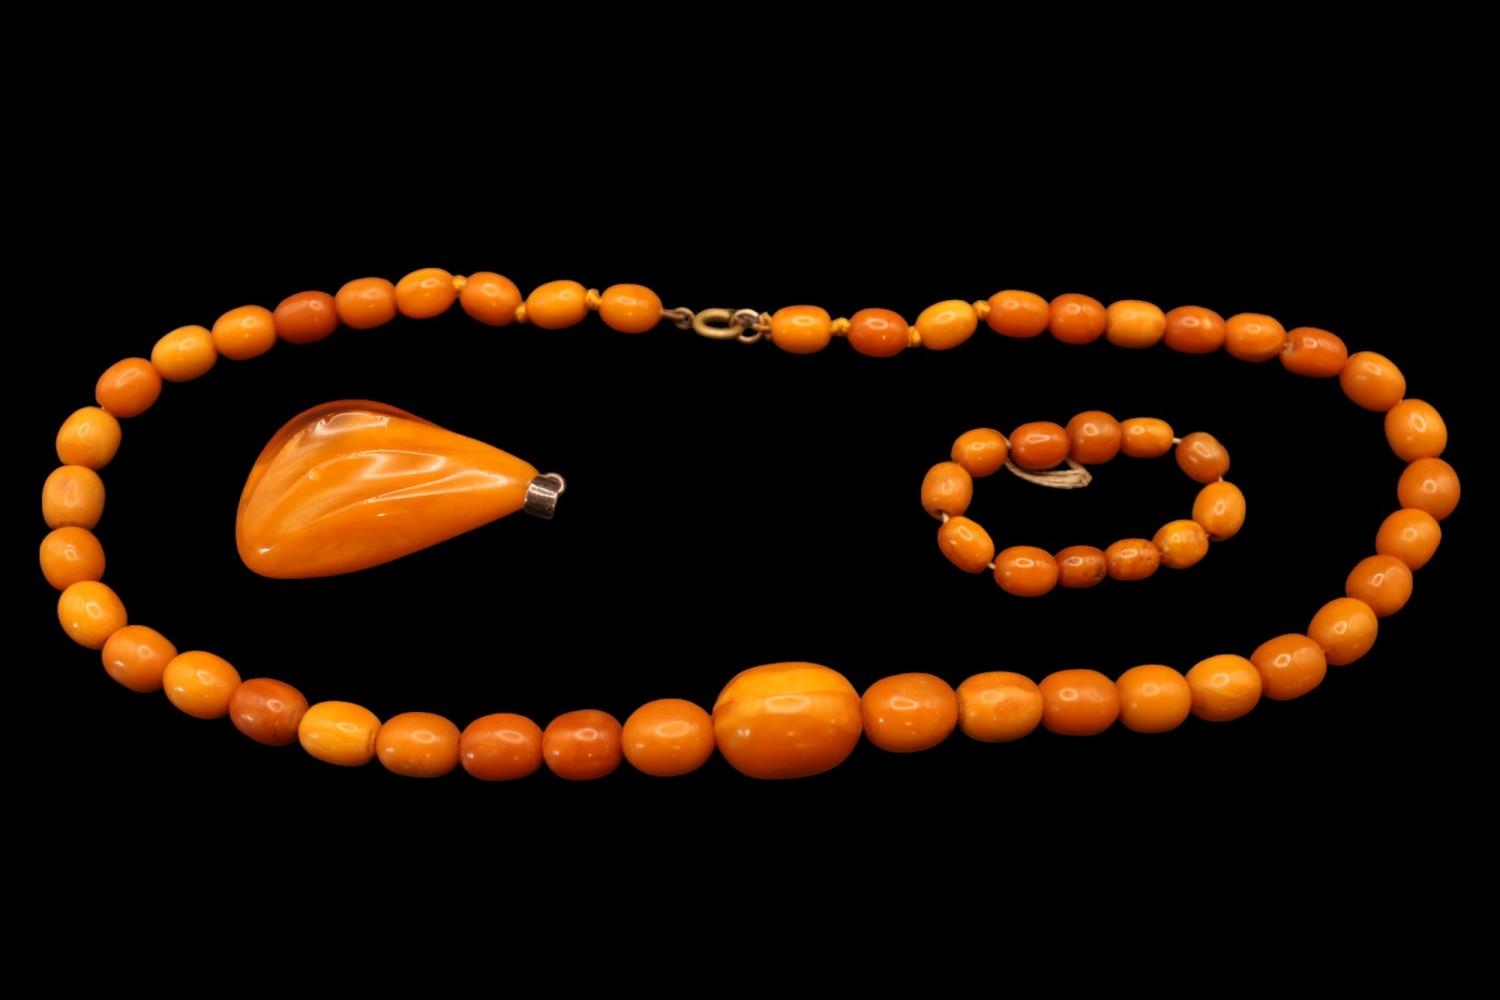 Graduated Butterscotch Amber Necklace of 43 Hand knotted beads 25.6g total weight from 8mm to 16.